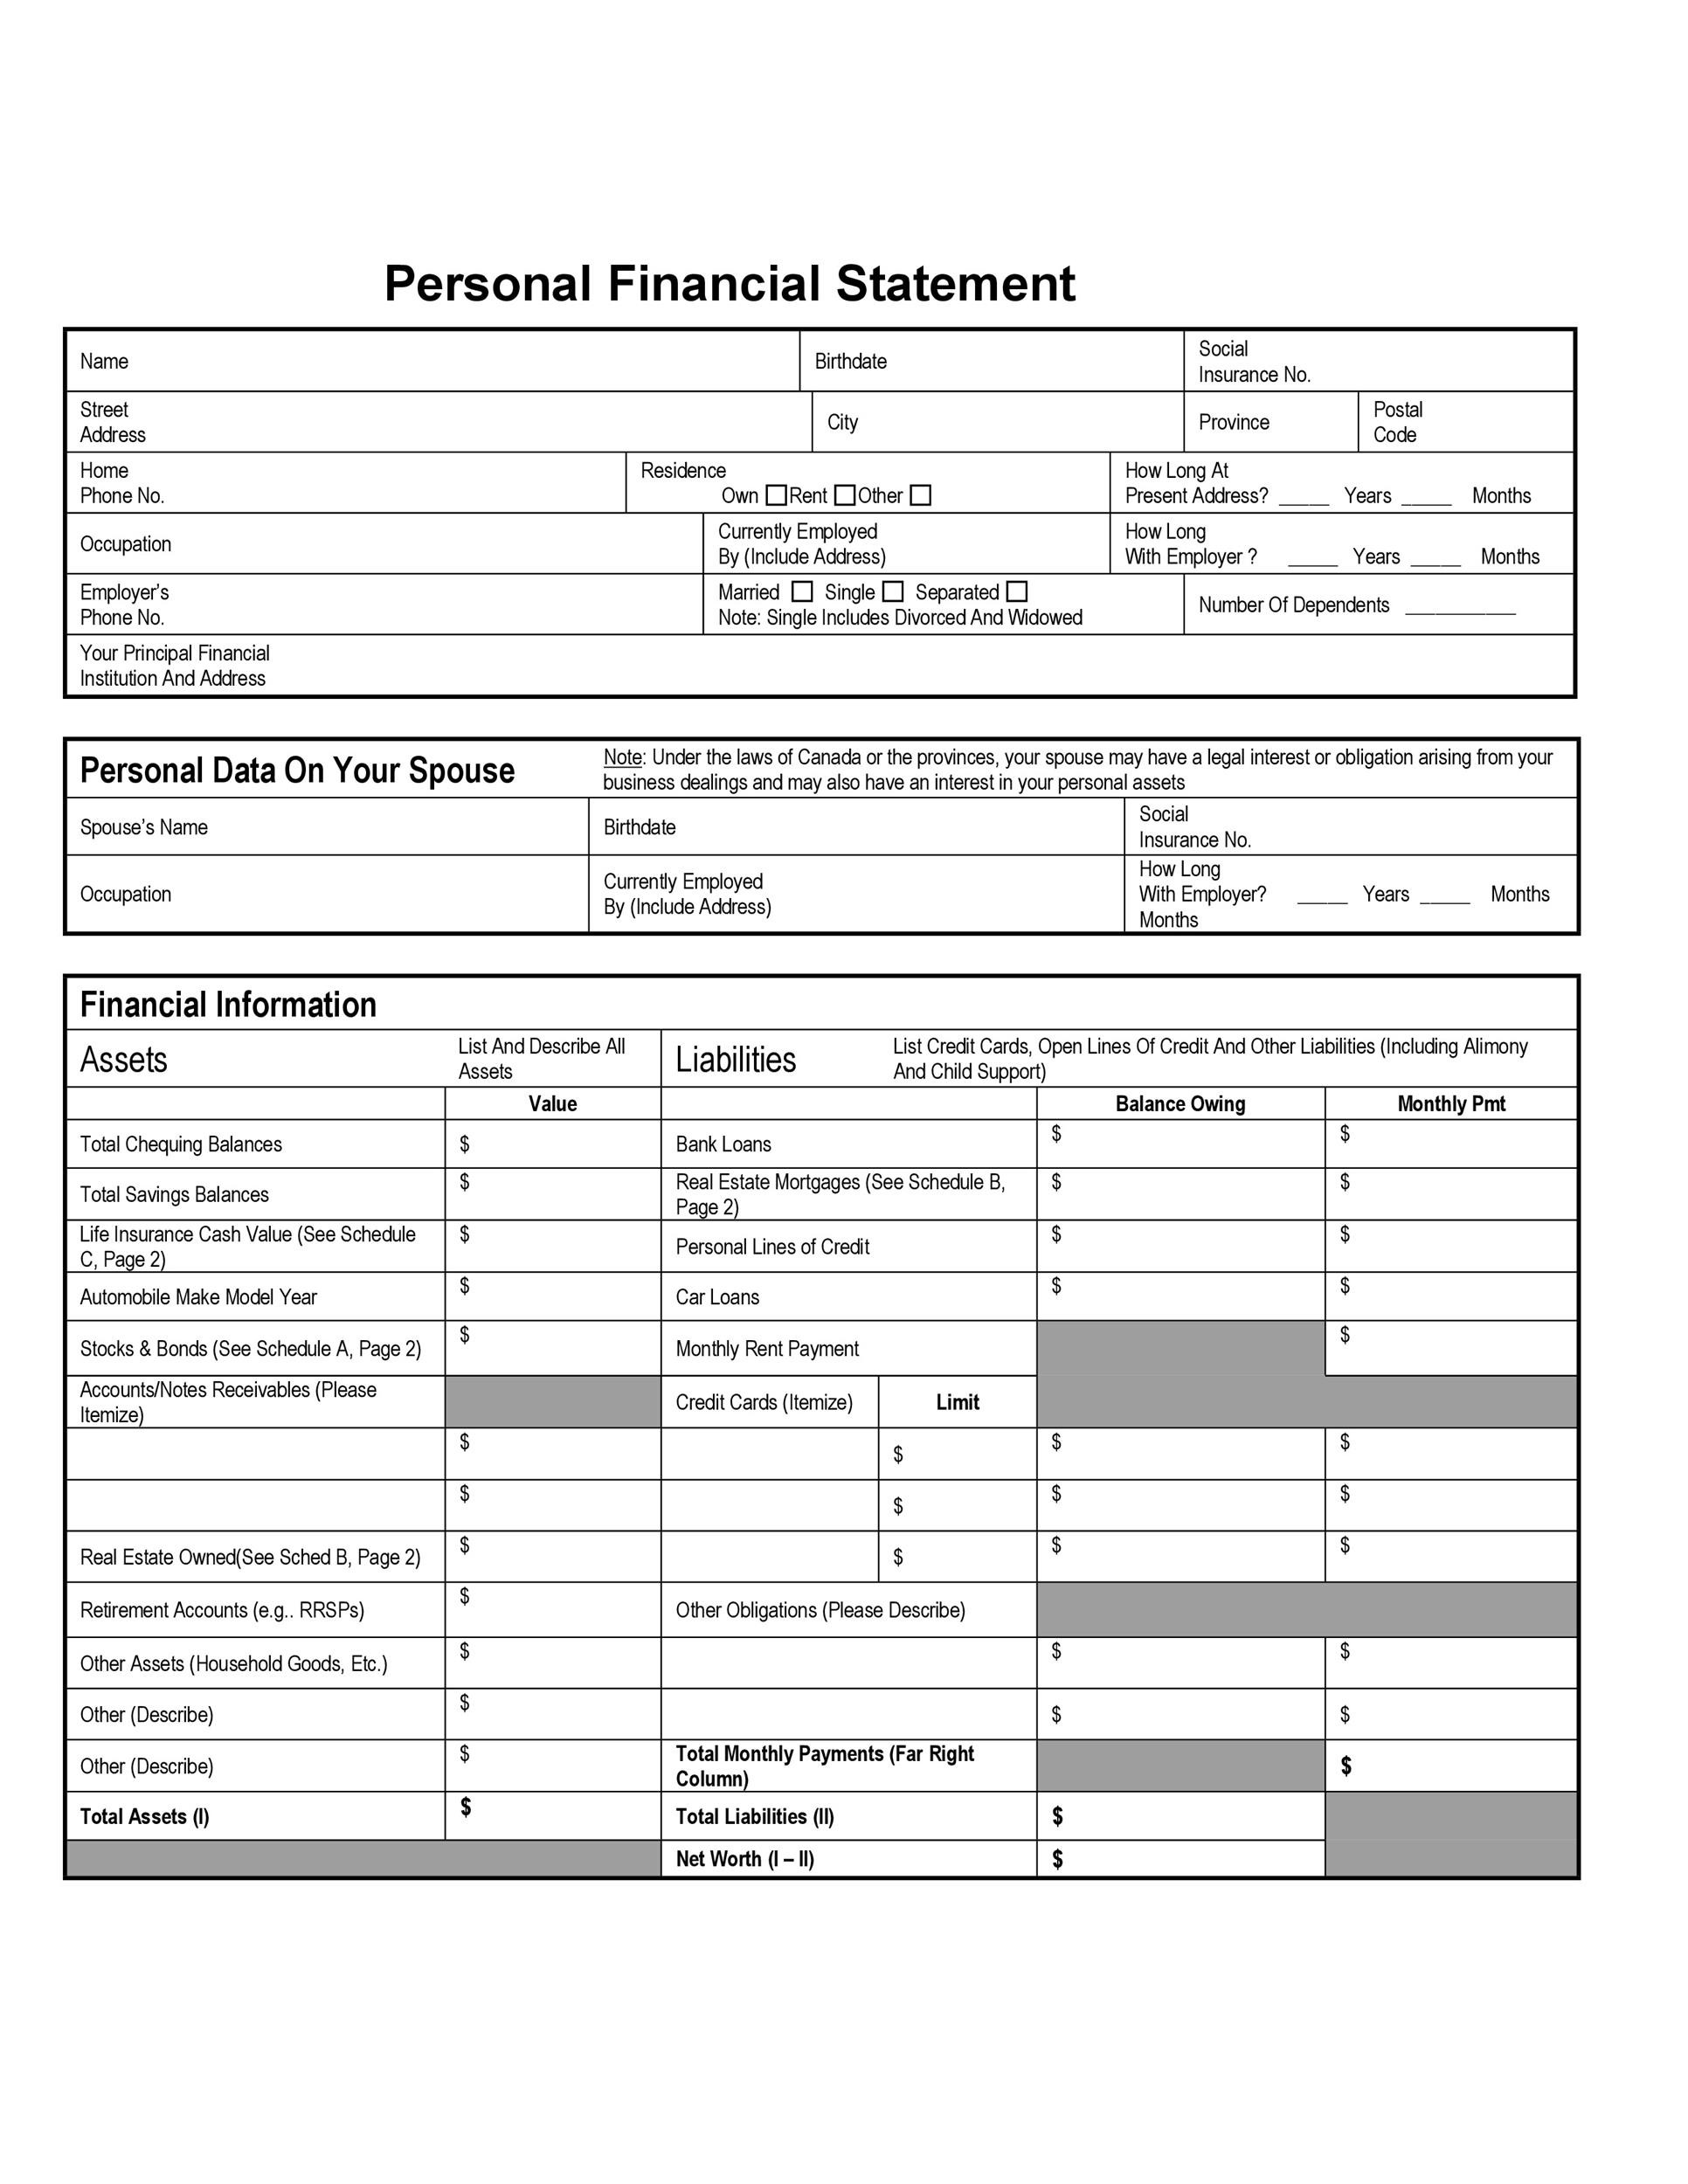 40  Personal Financial Statement Templates Forms ᐅ TemplateLab